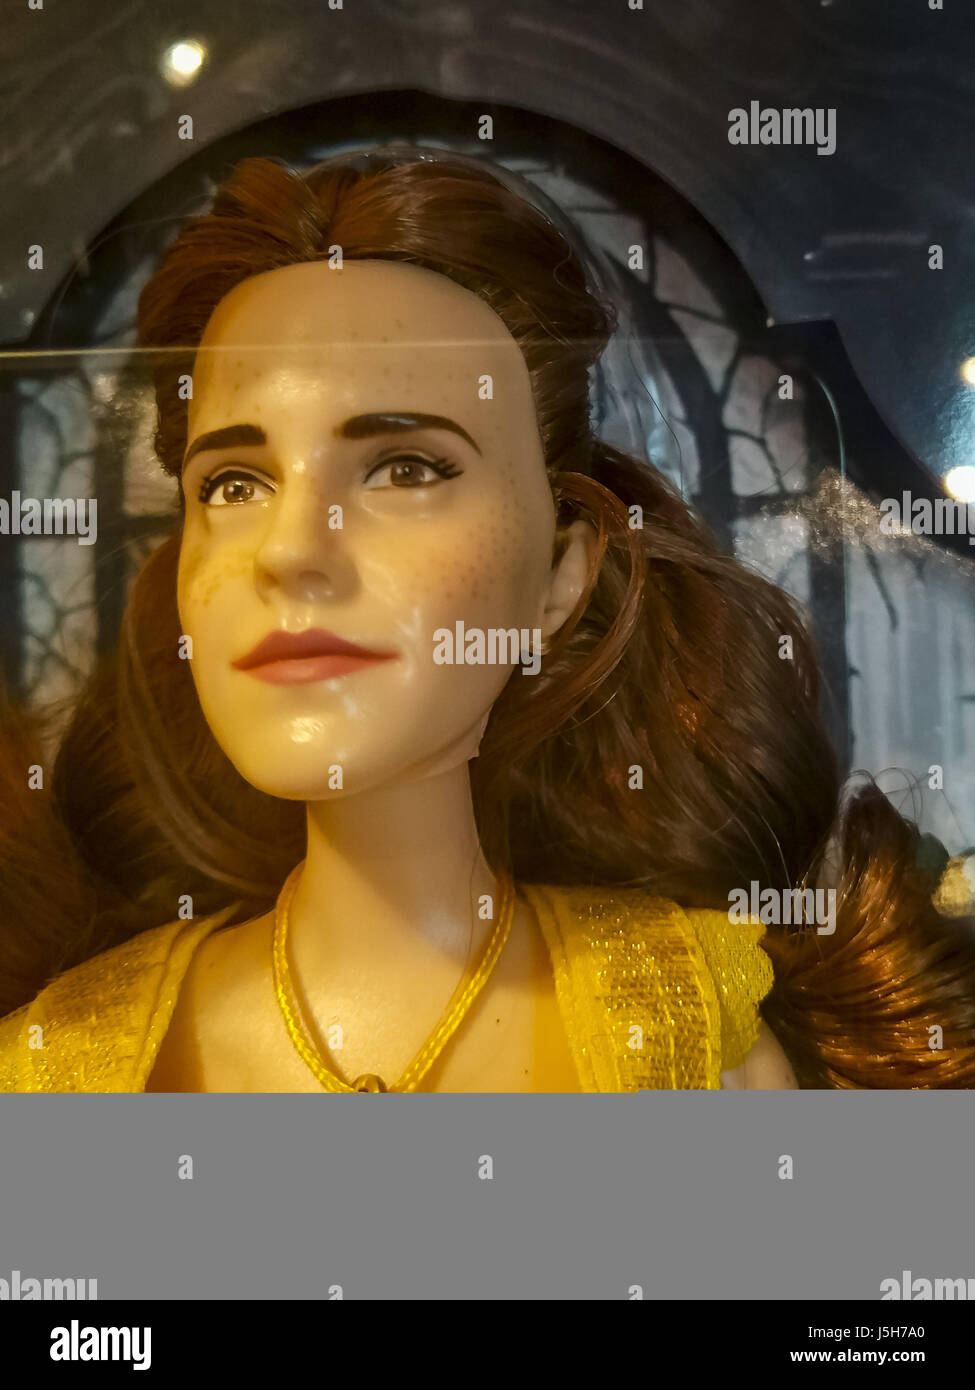 May 16, 2017 - Shanghai, Shanghai, China - Shanghai, CHINA-May 16 2017:  (EDITORIAL USE ONLY. CHINA OUT) People find that the Barbie doll of  Princess Belle of Emma Watson version looks like